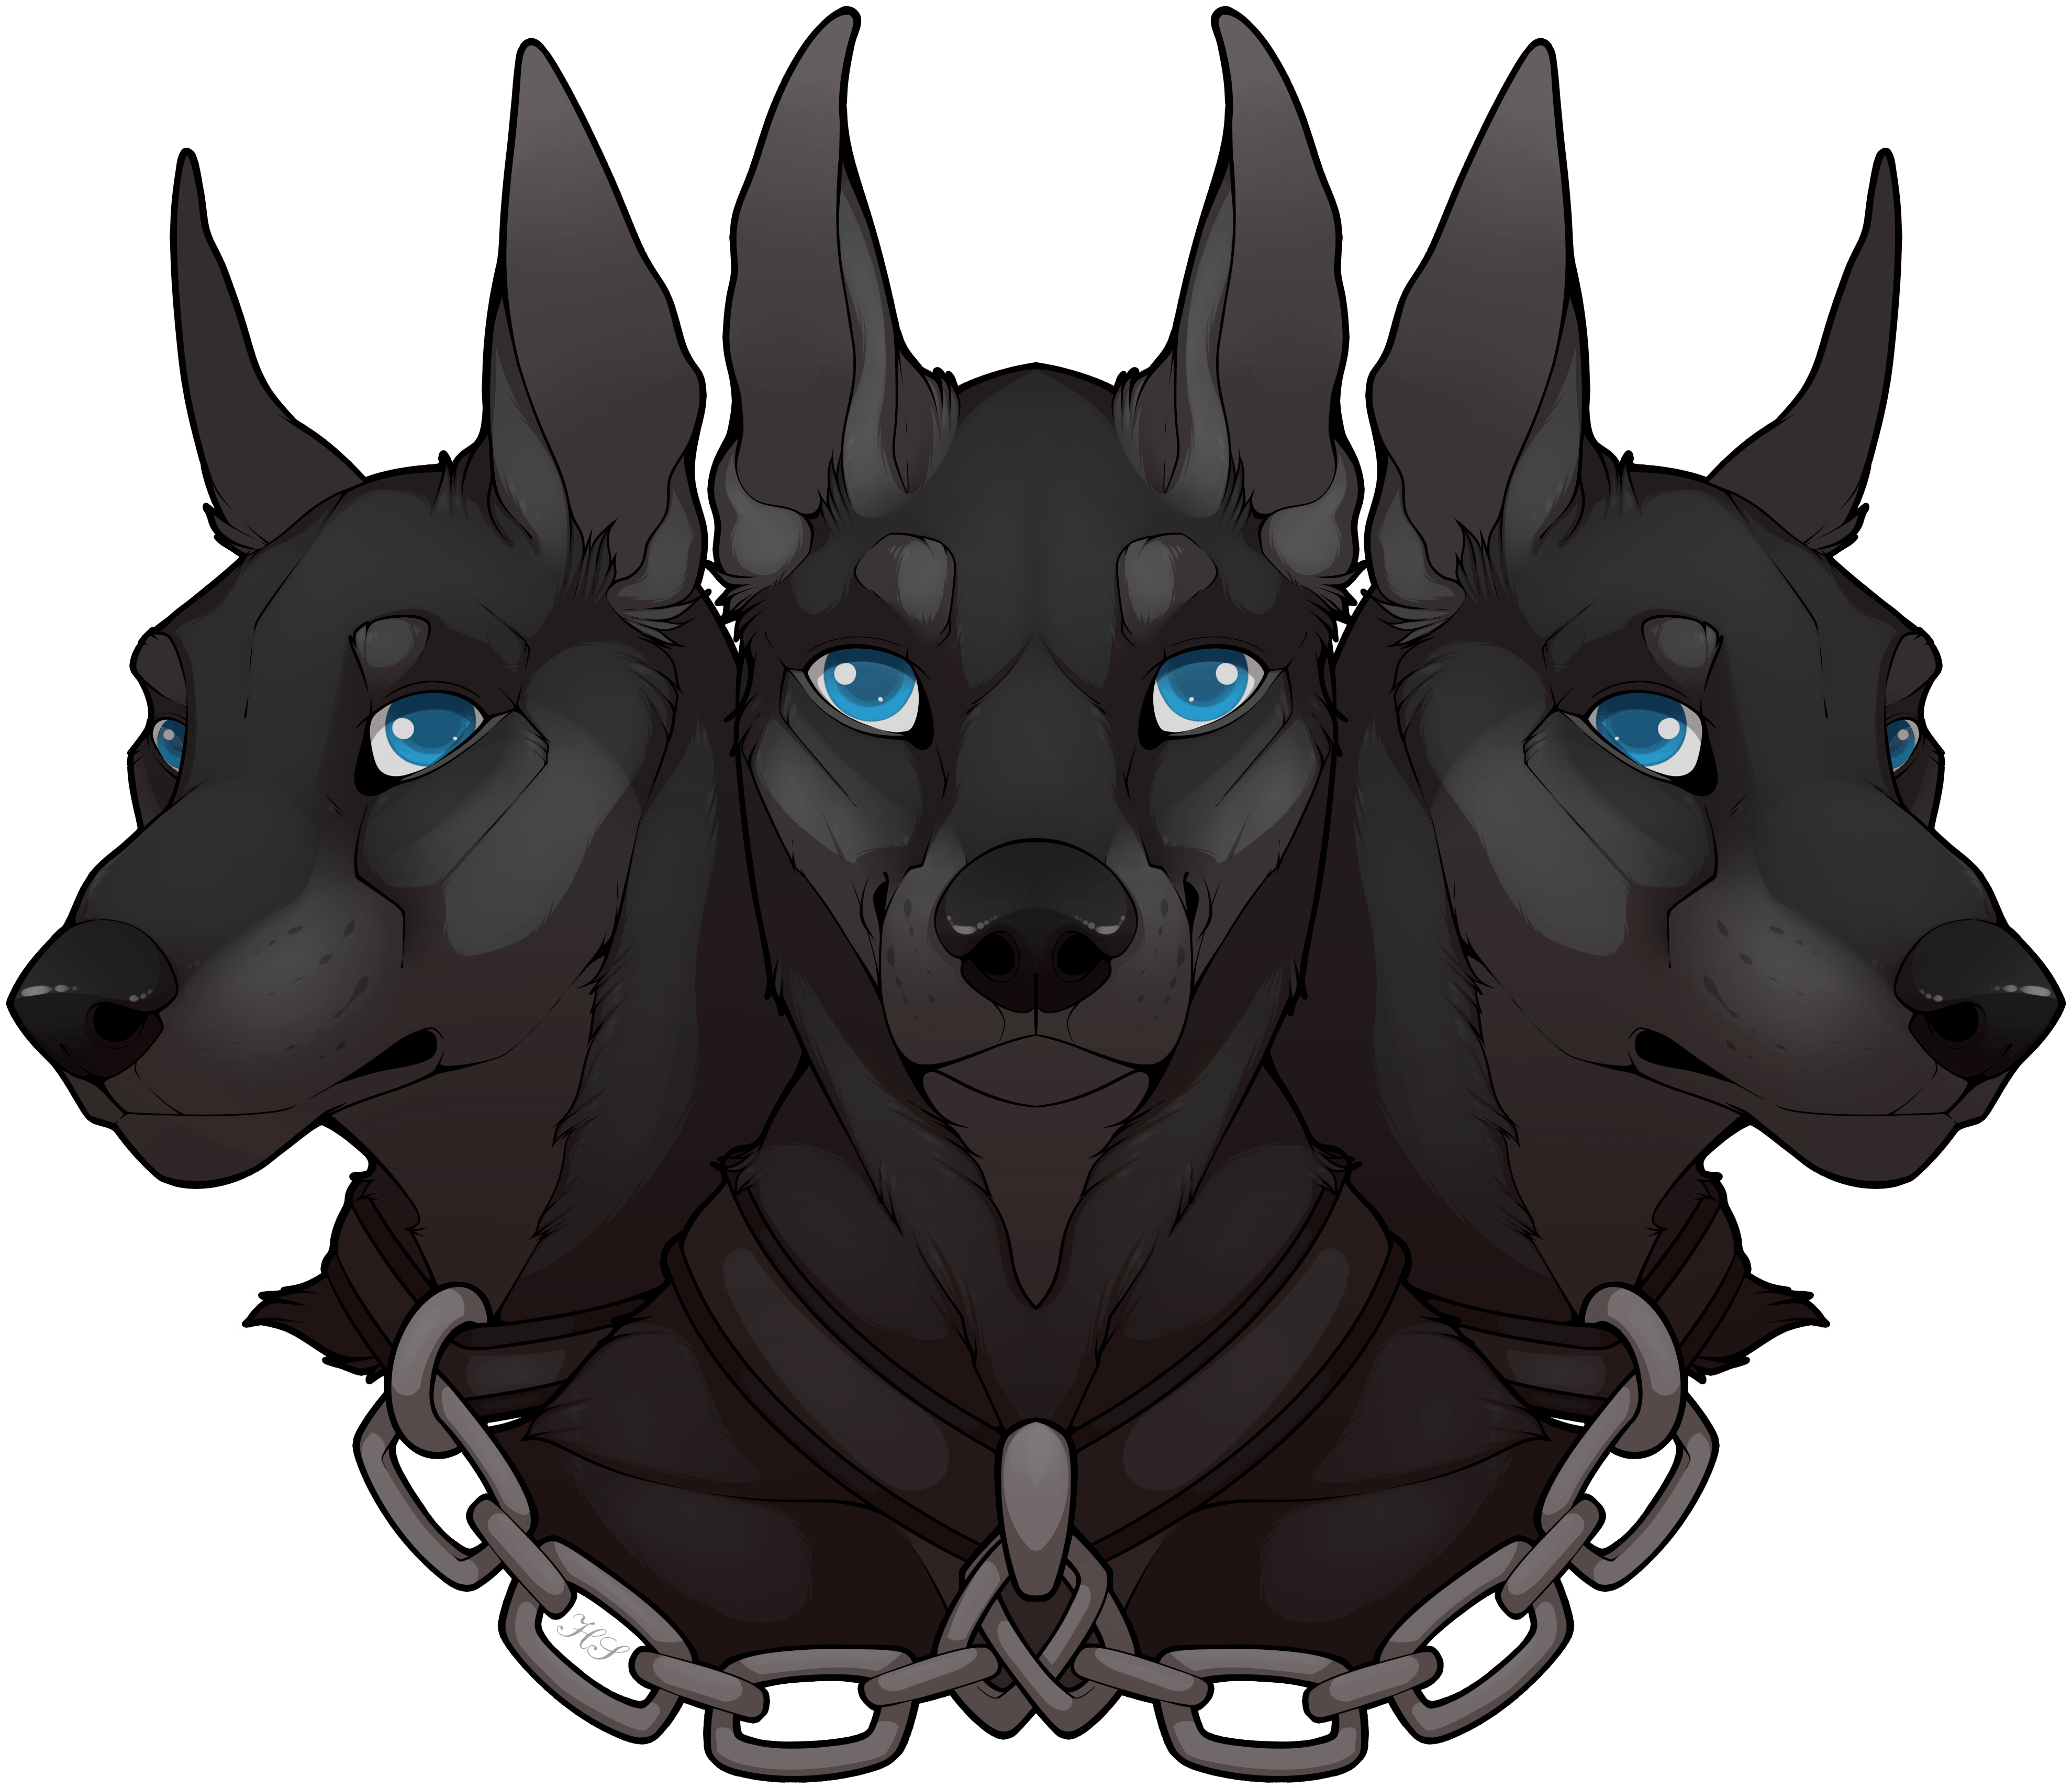 Cerberus - Printing Clipart - Large Size Png Image - PikPng.